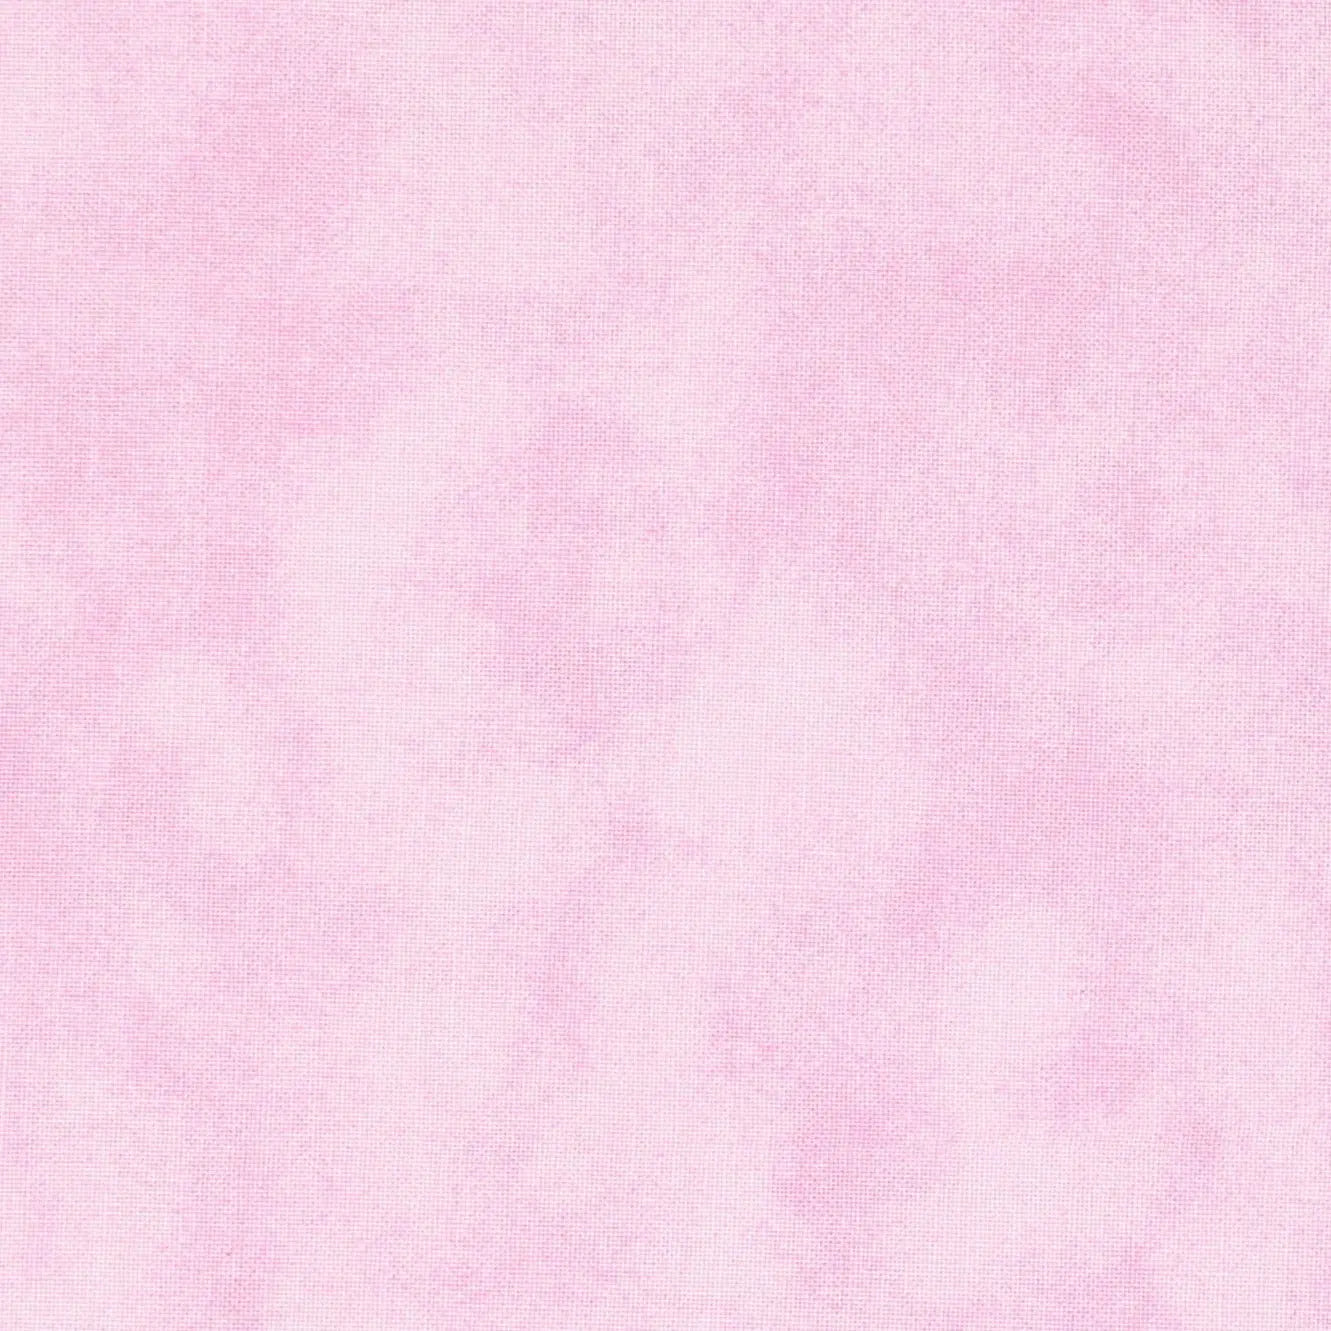 Pink Pastel Color Waves Cotton Wideback Fabric 